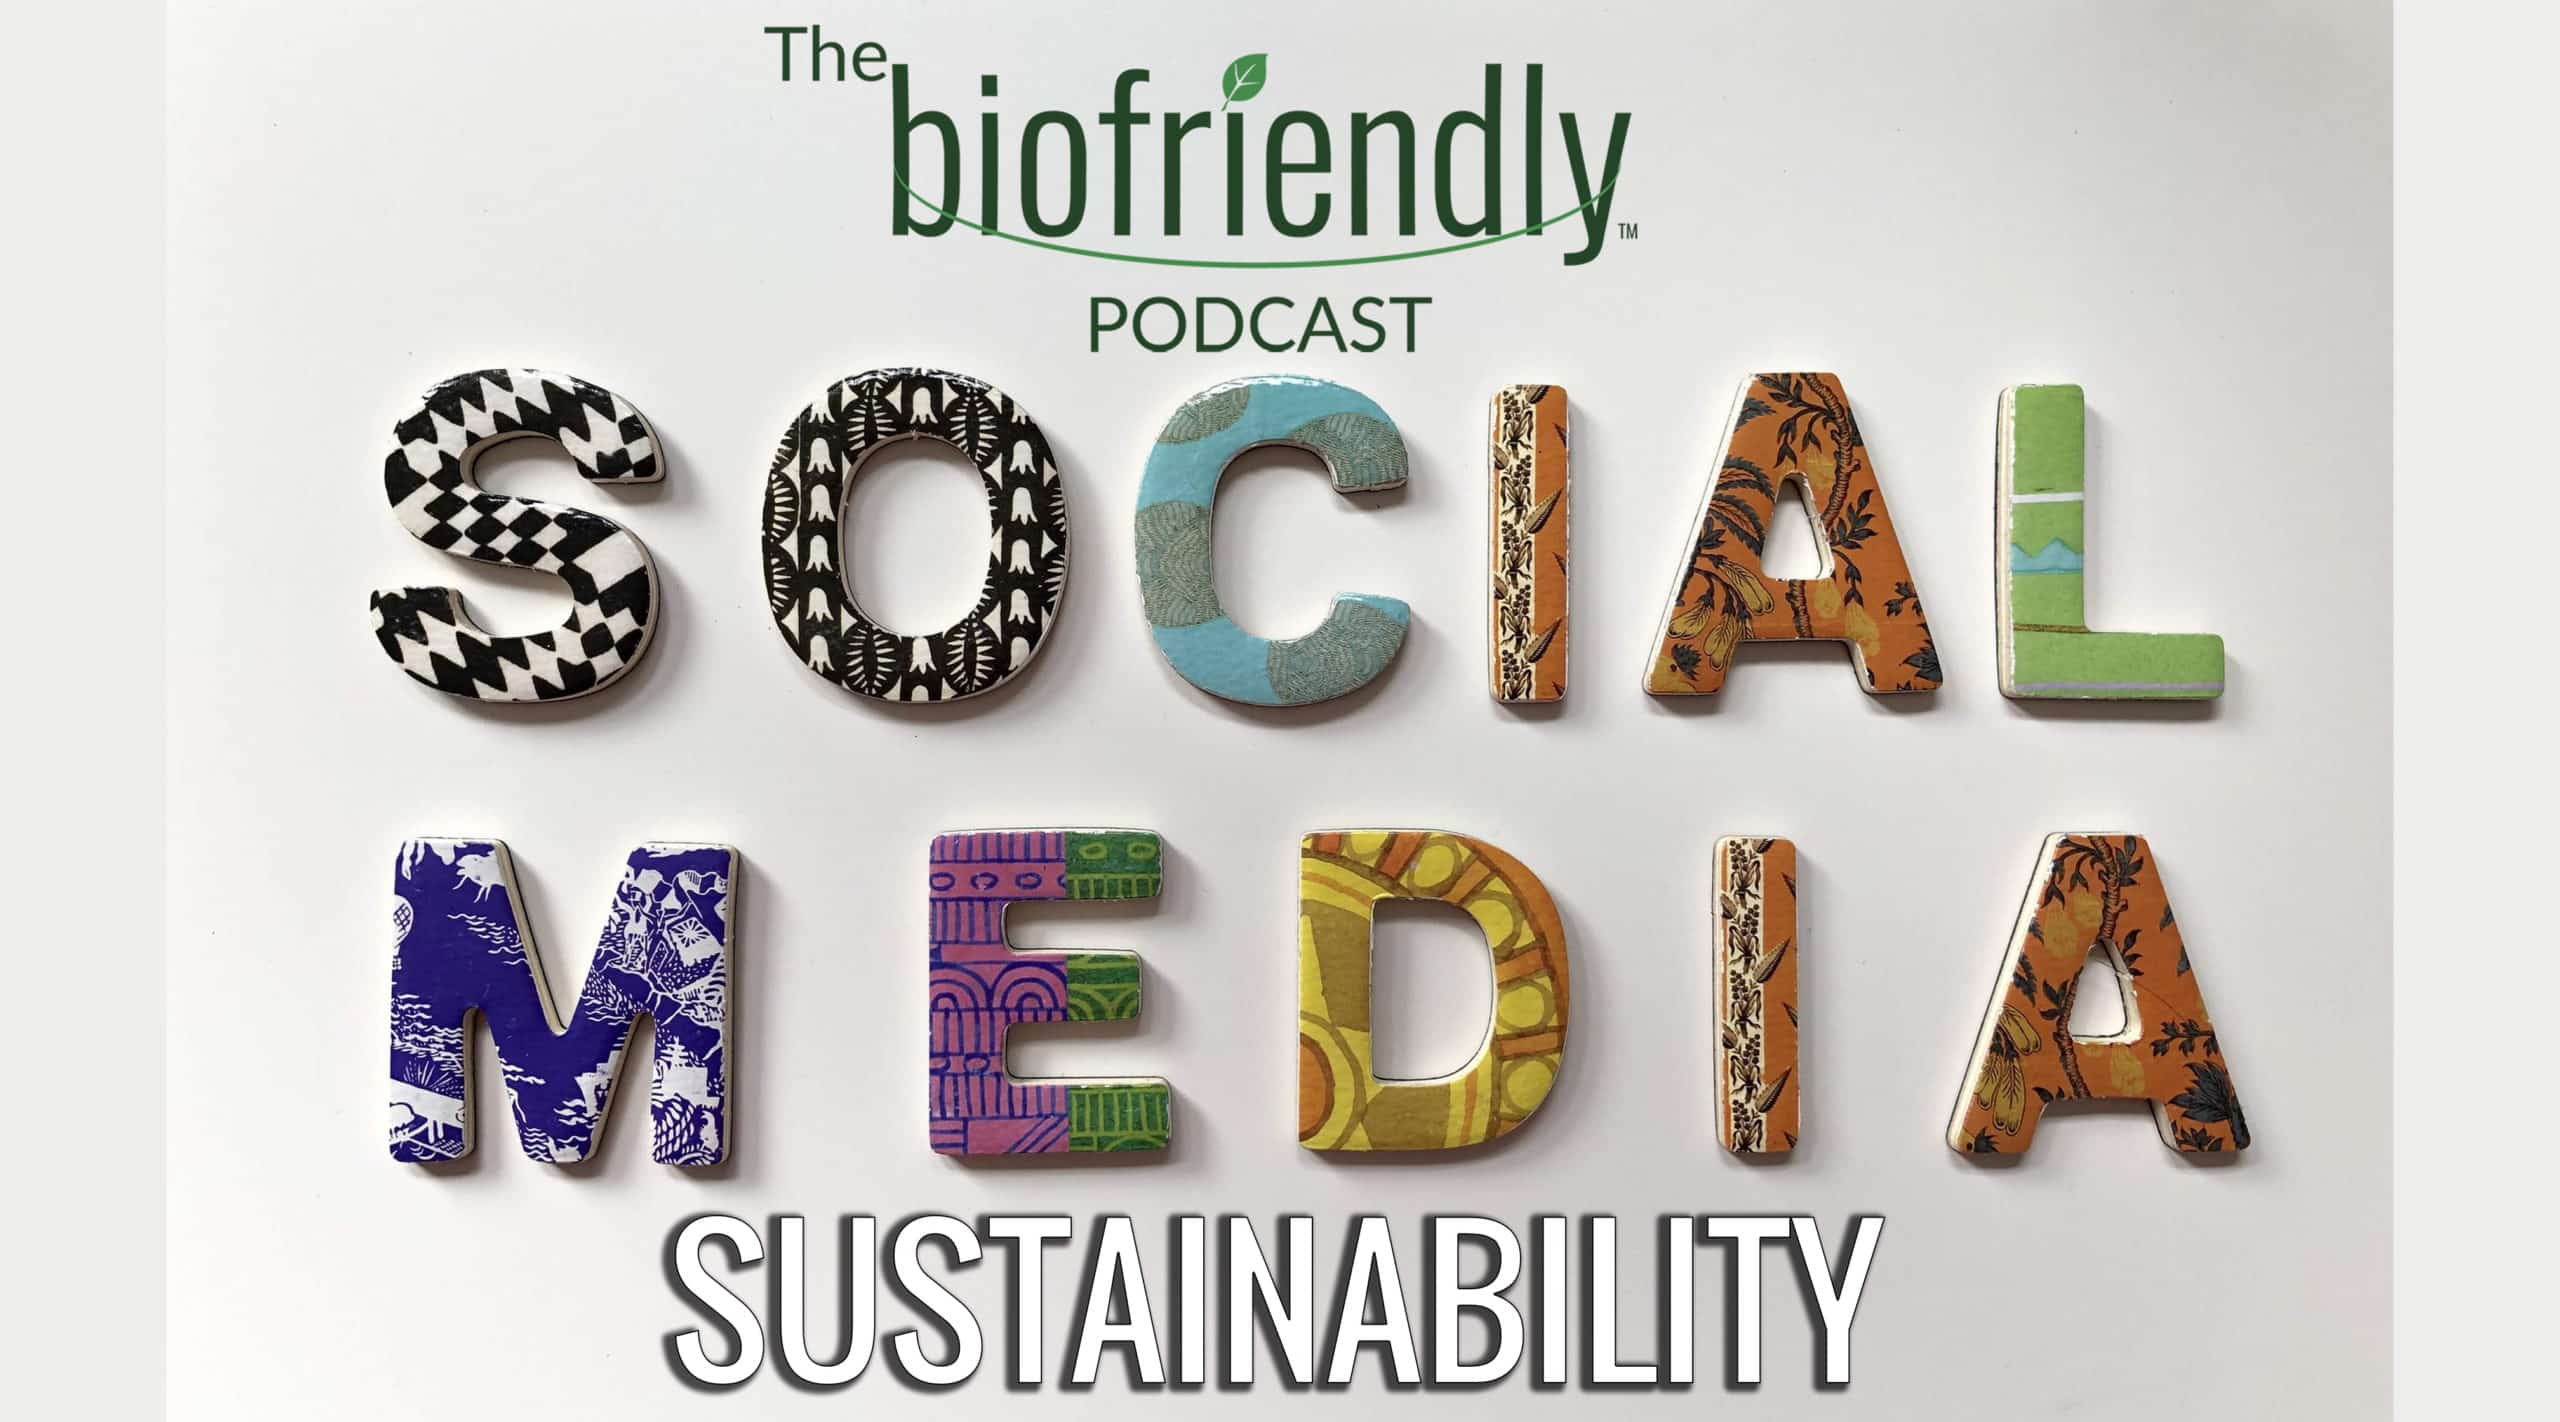 The Biofriendly Podcast - Episode 72 - Social Media Sustainability